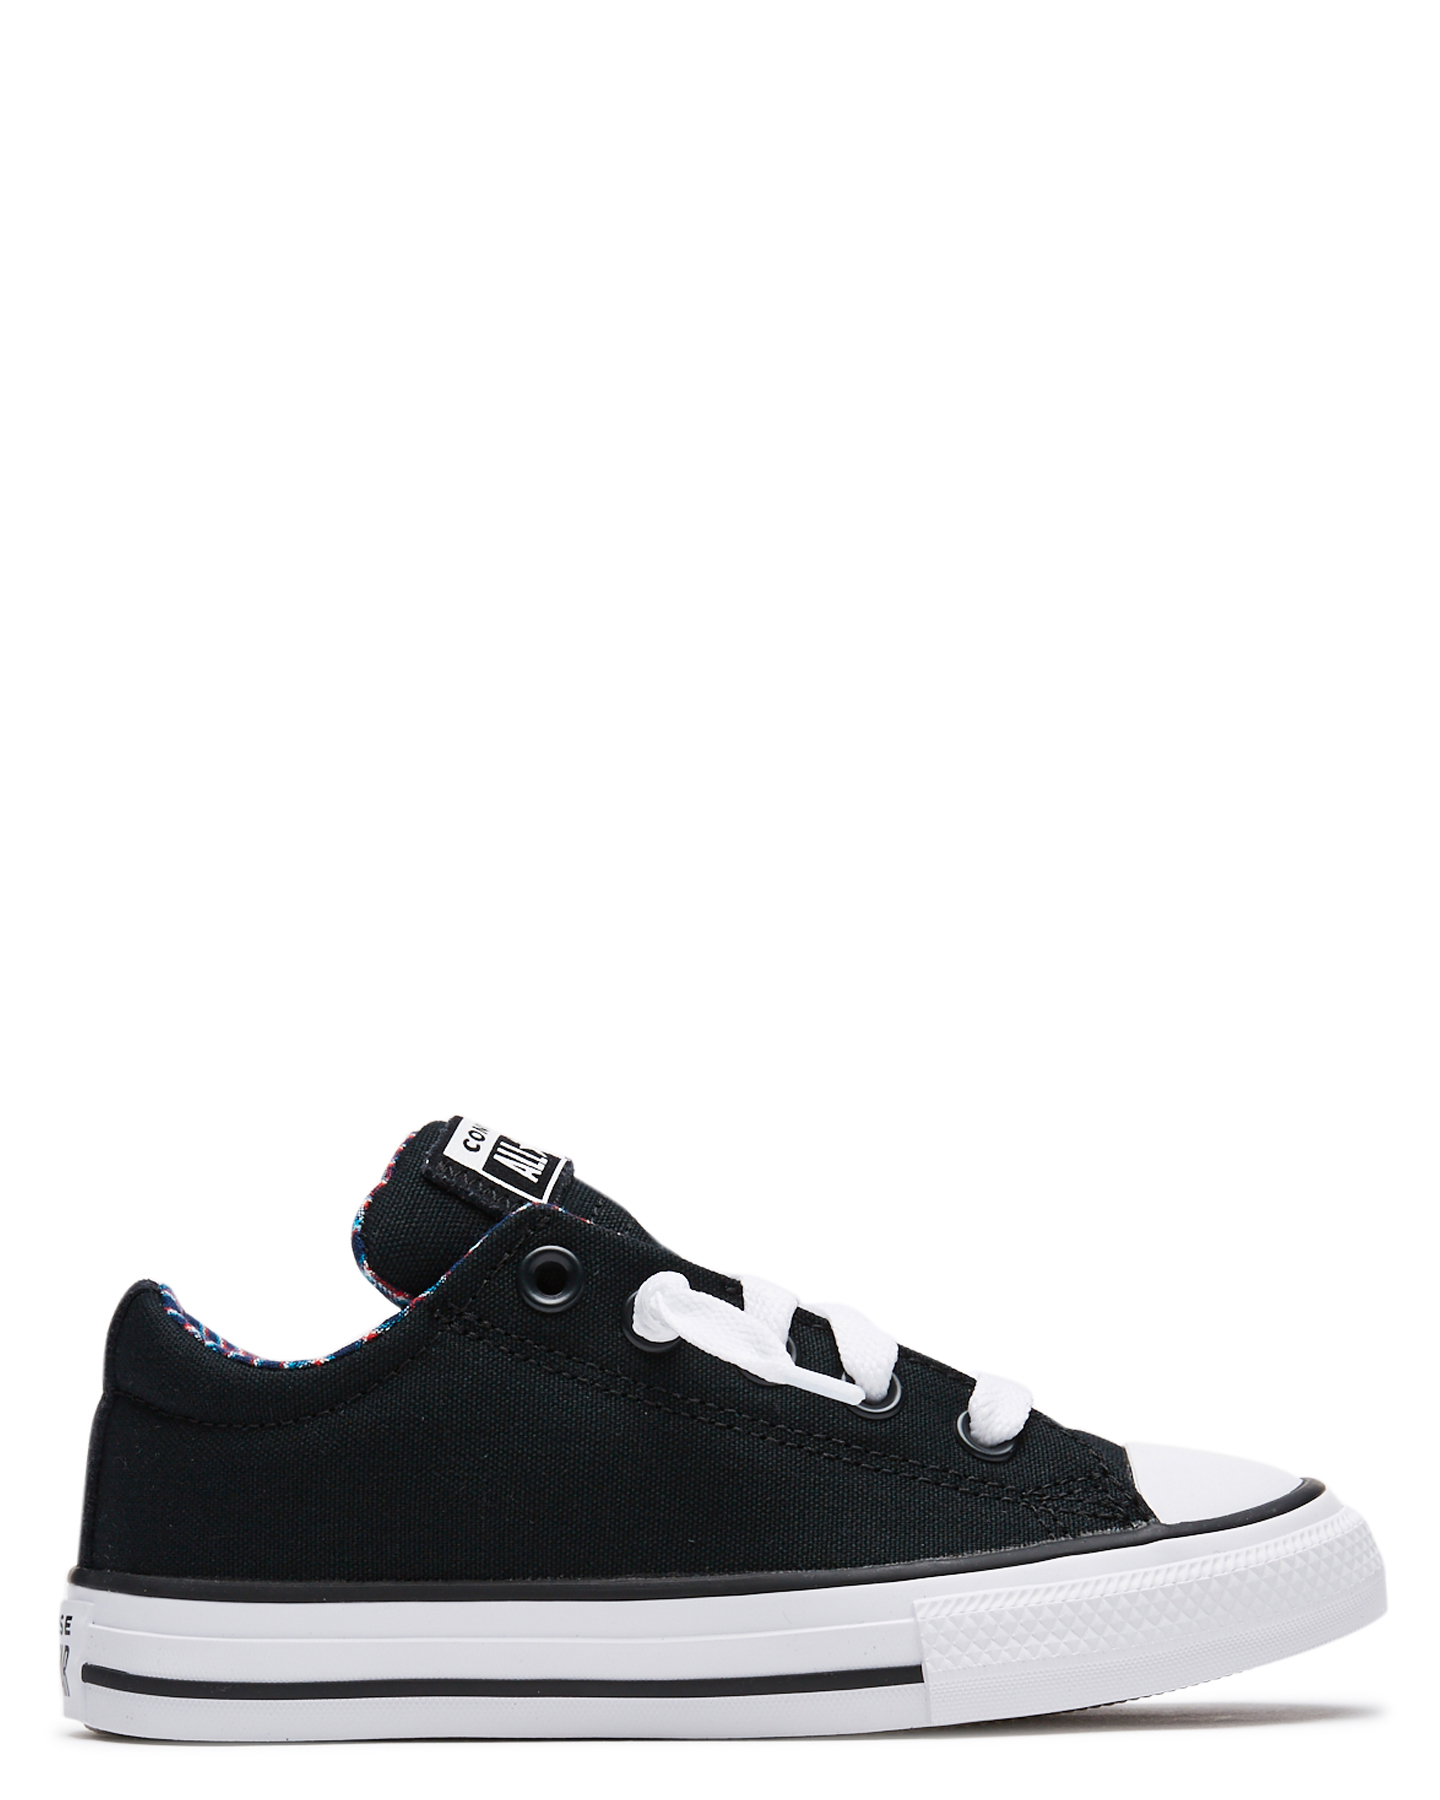 converse chuck taylor slip on youth